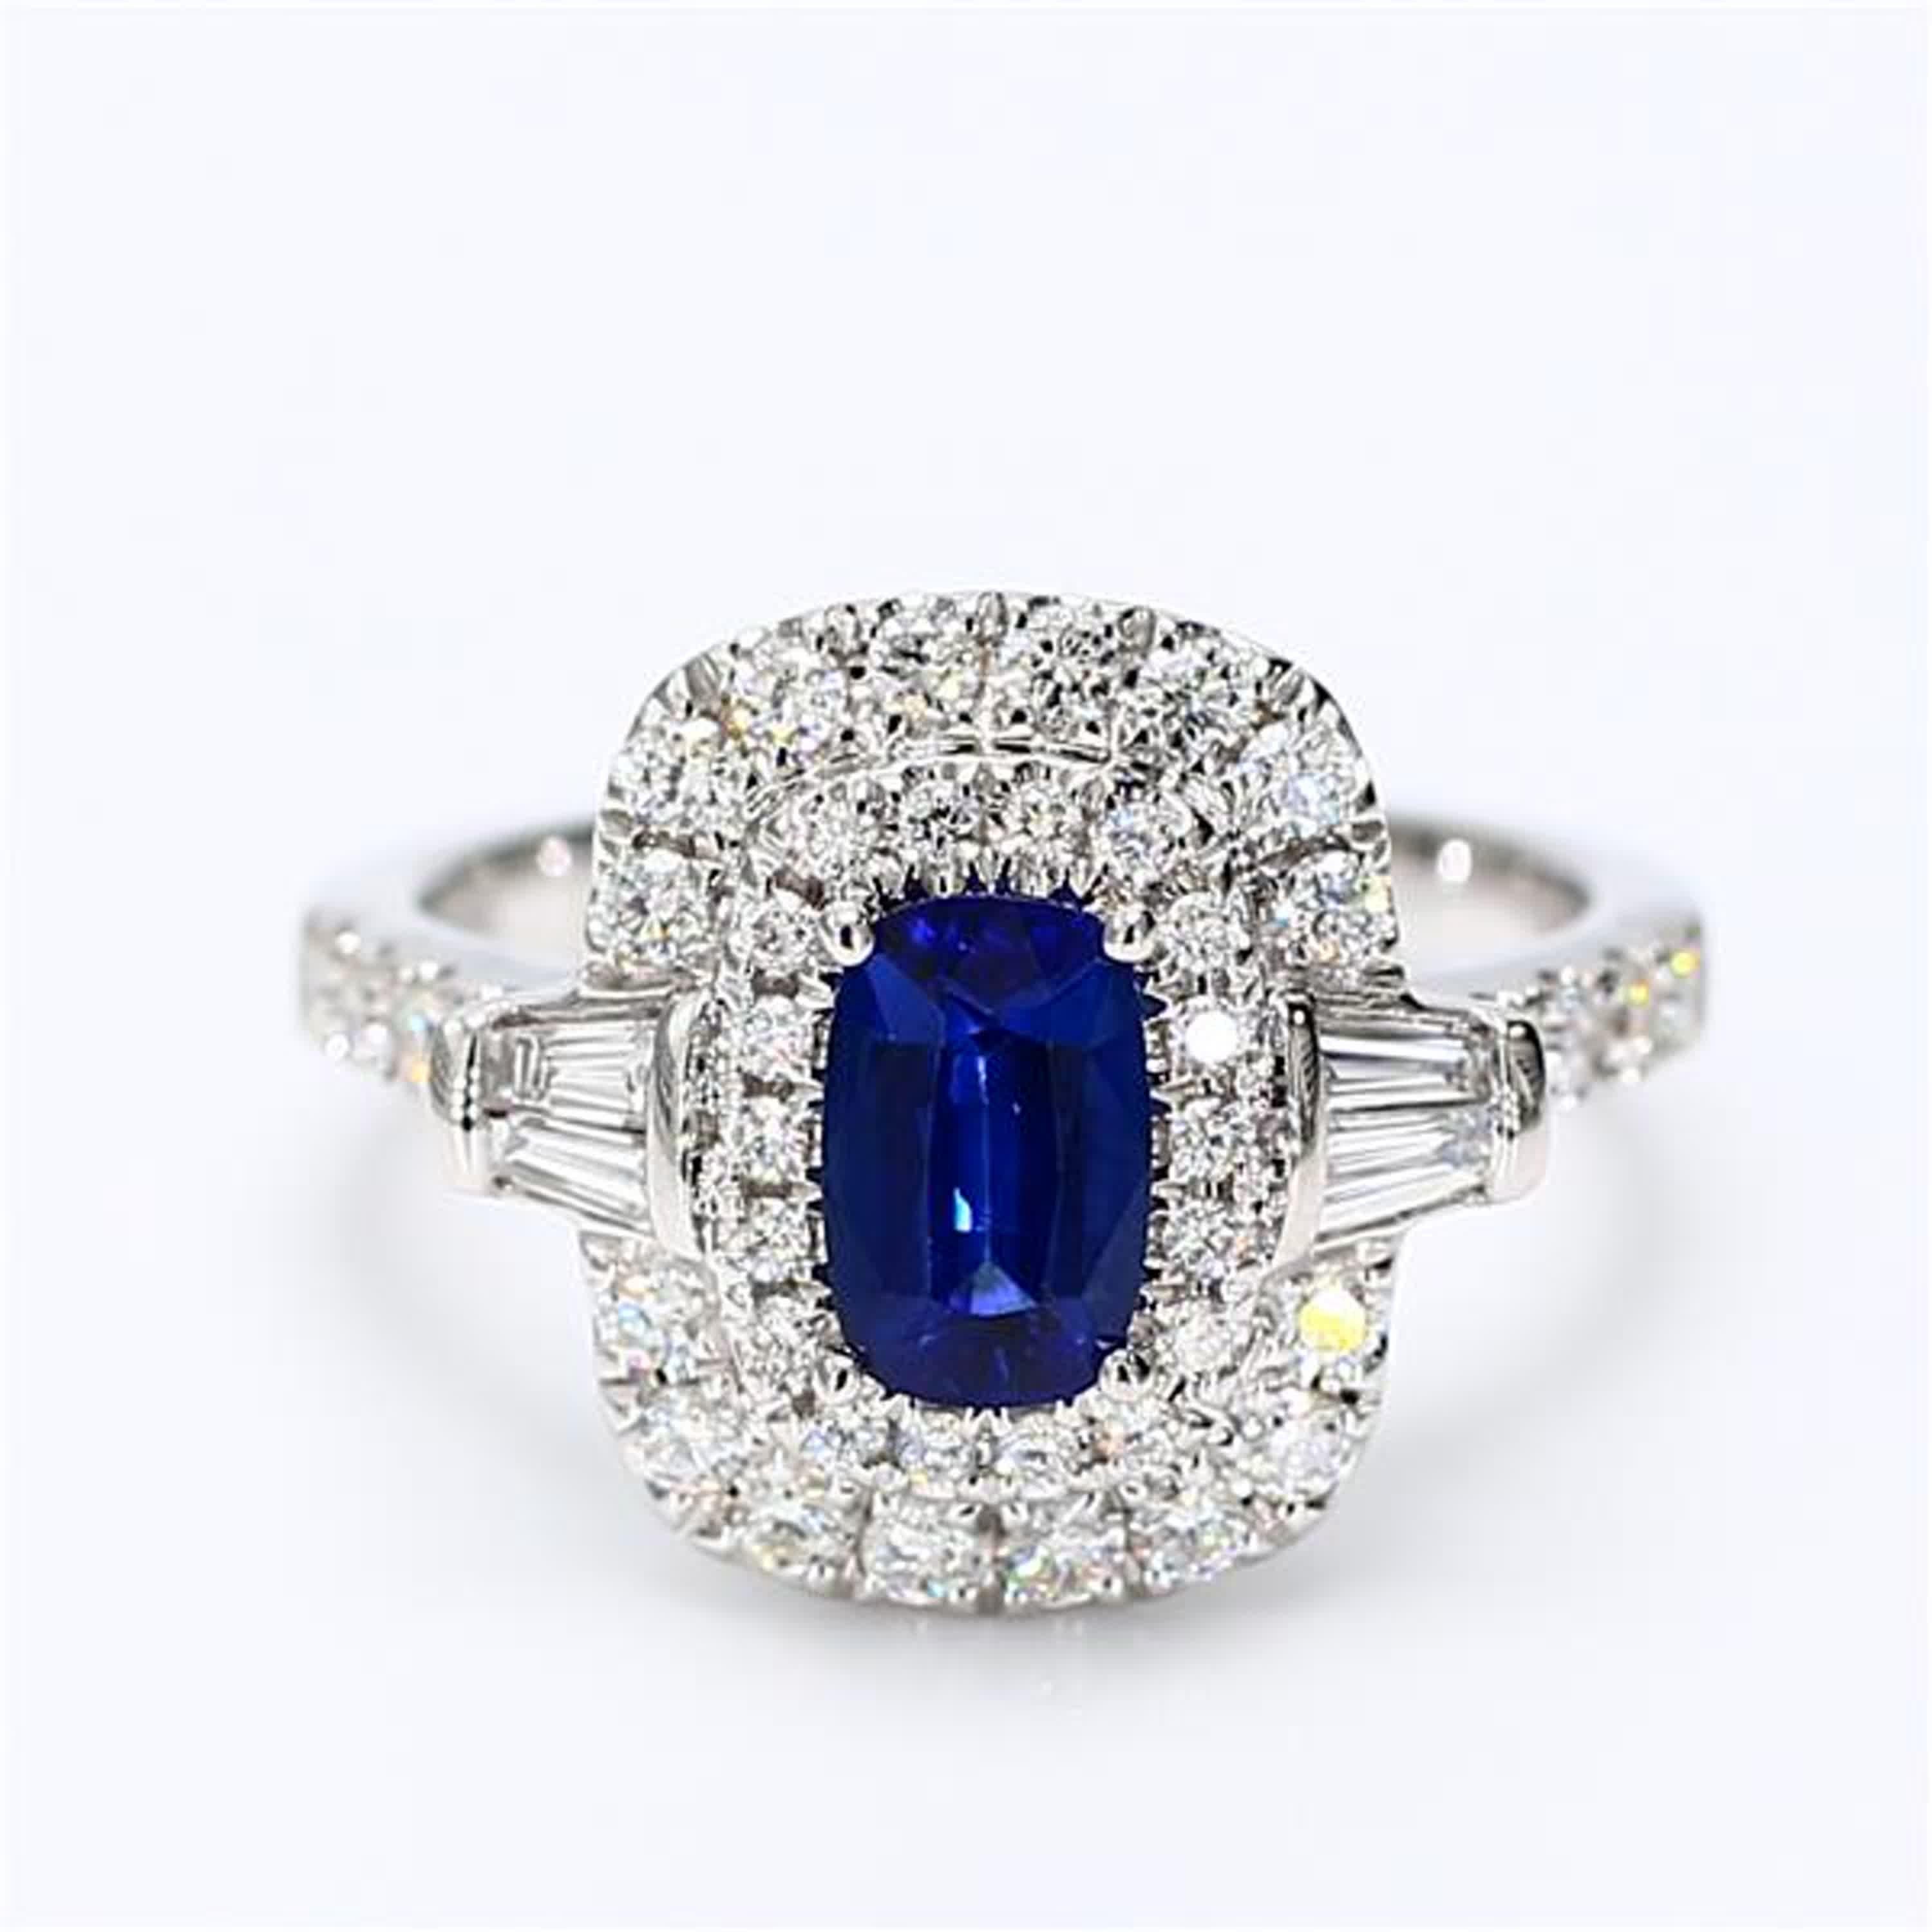 RareGemWorld's classic sapphire ring. Mounted in a beautiful 18K White Gold setting with a natural cushion cut blue sapphire. The sapphire is surrounded by natural baguette cut white diamonds and natural round white diamond melee. This ring is